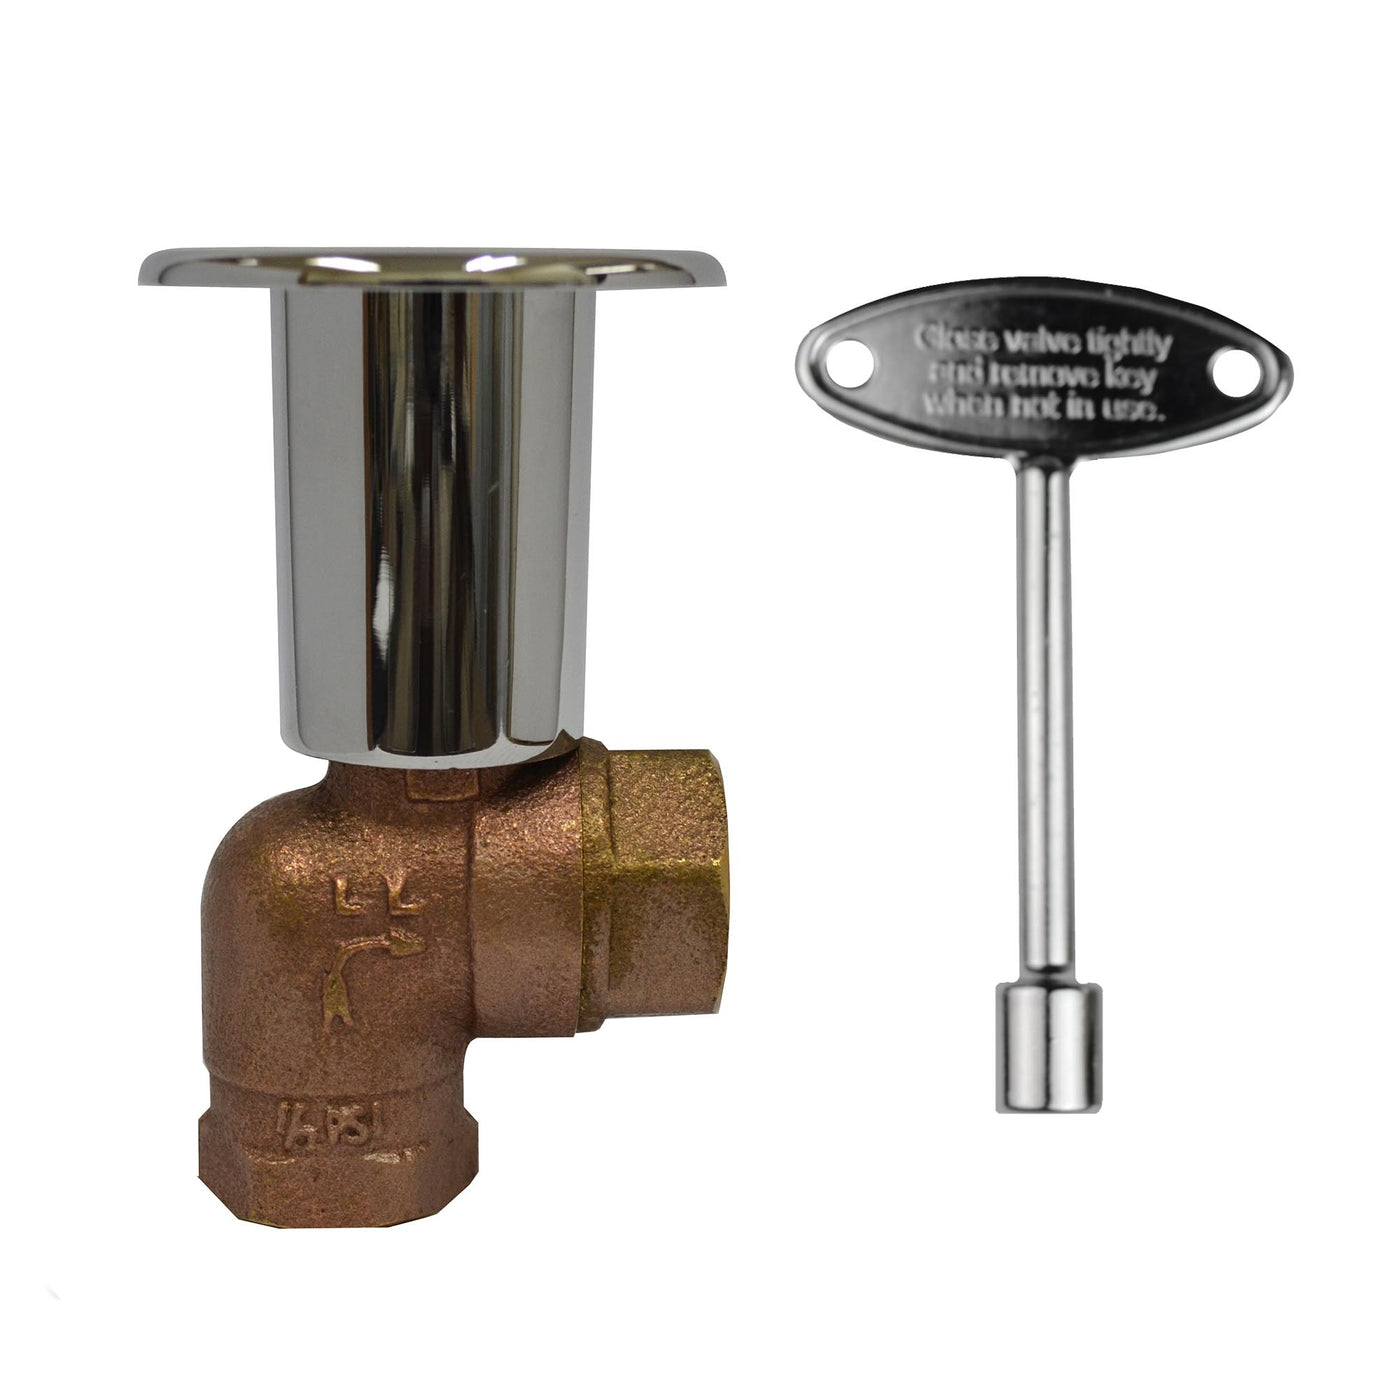 Theoutdoorplus 1/2” FULL FLOW BALL VALVE WITH 90° BEND OPT-259FF